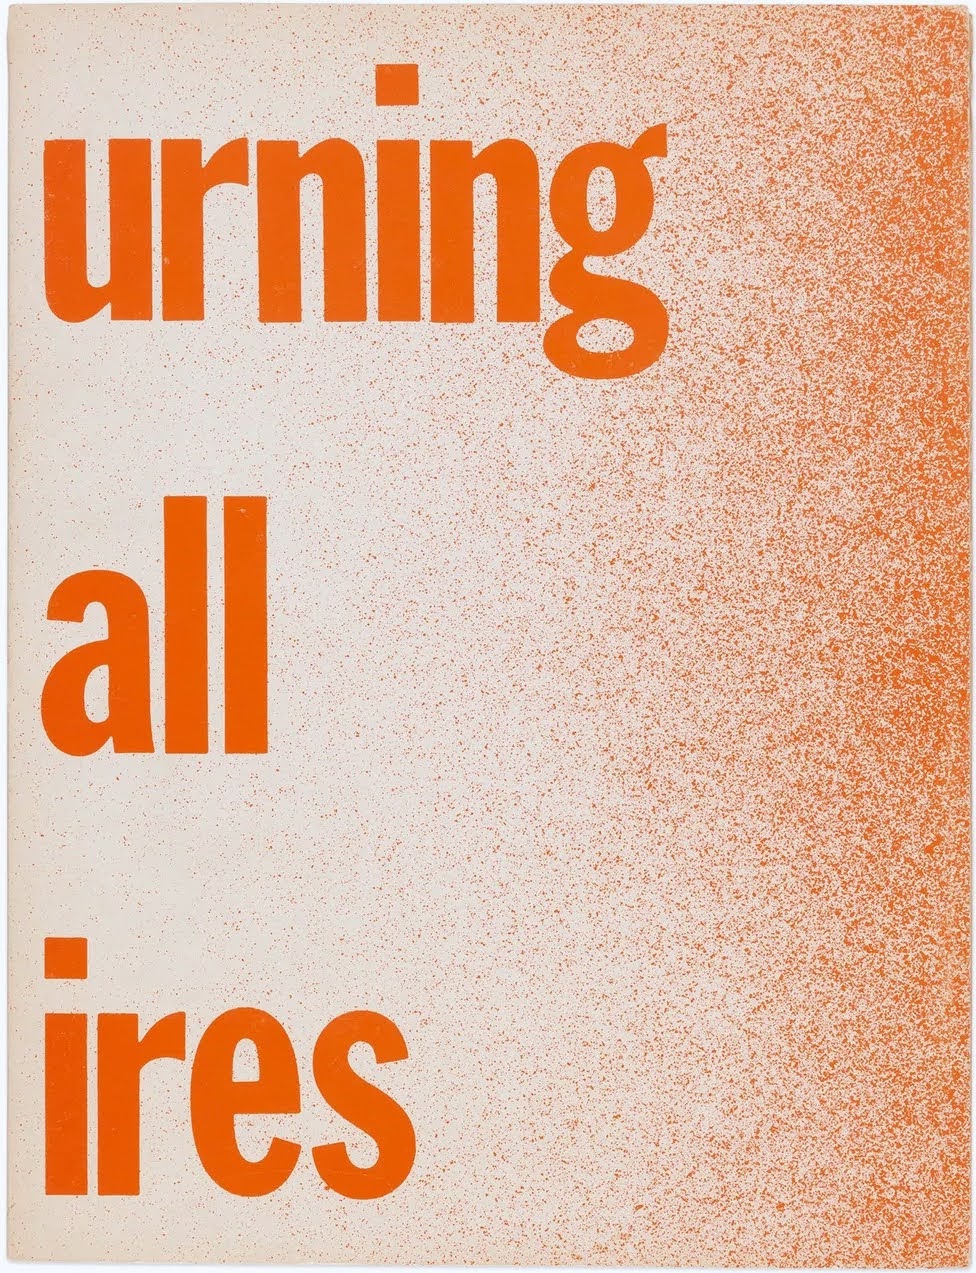 Bruce Naumans Burning Small Fires (1968), cover